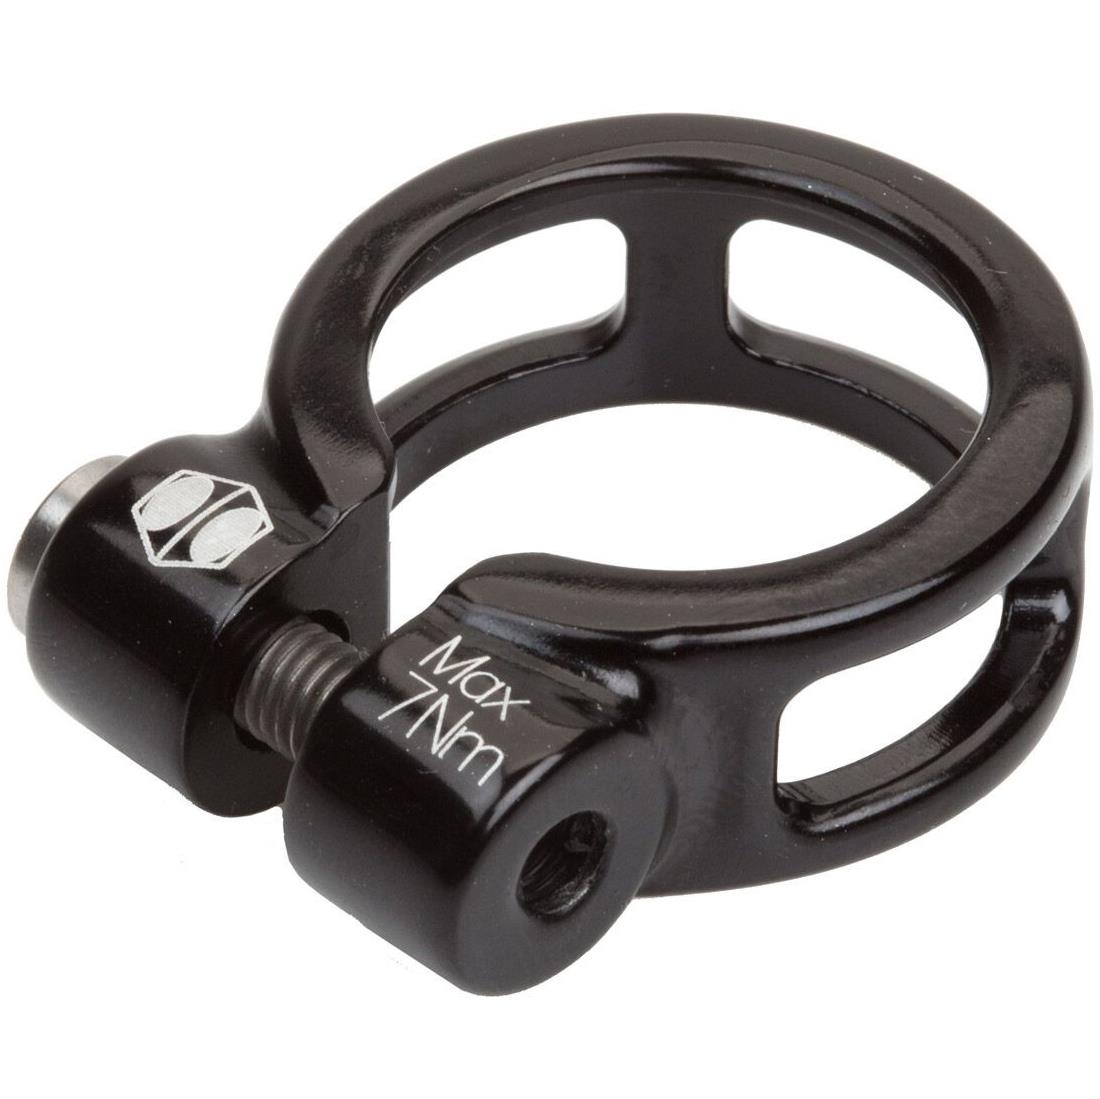 Box One Colliers de Selle